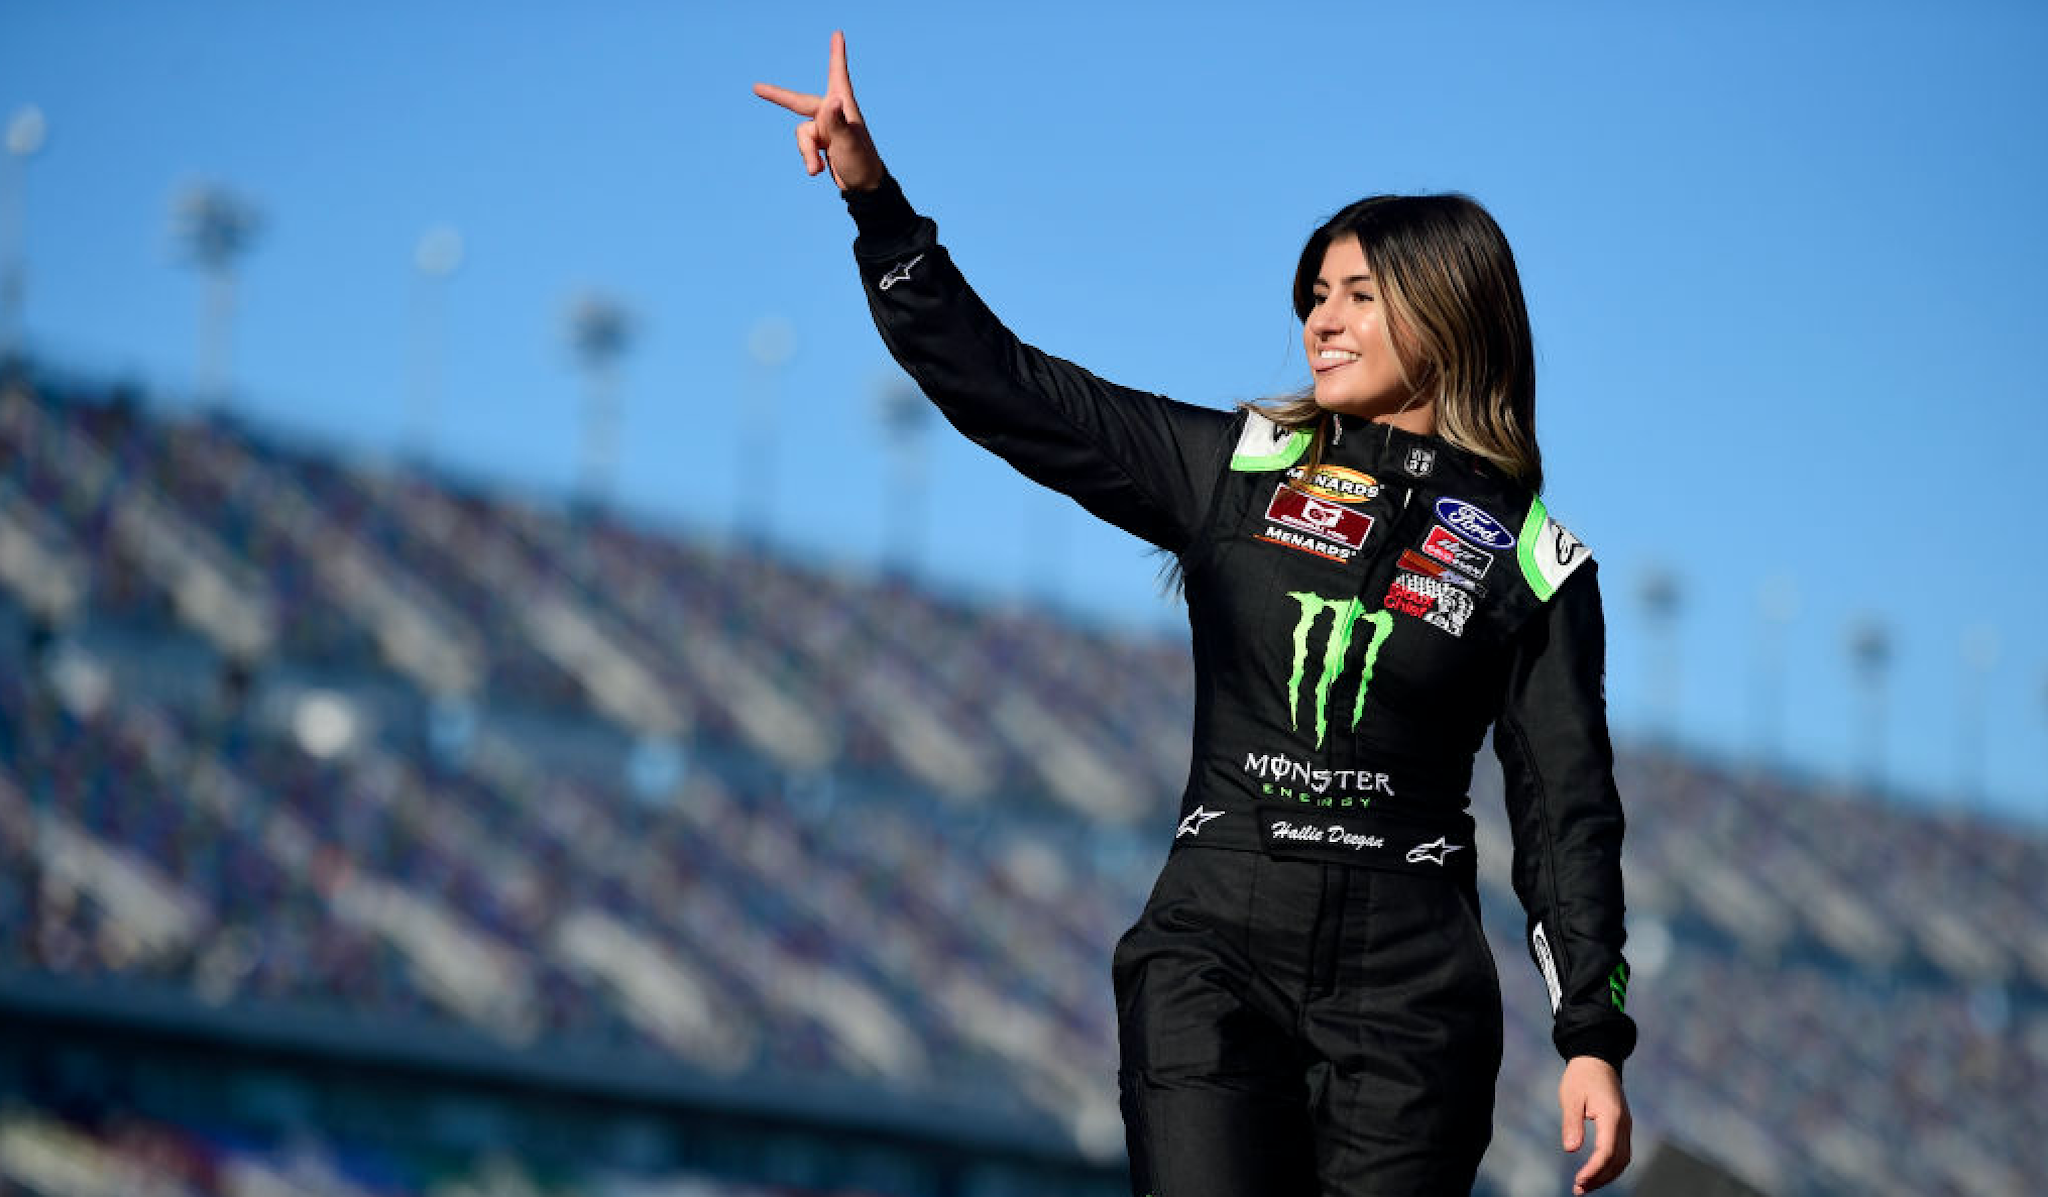 Hailie Deegan, driver of the #4 Monster Energy Ford, is introduced prior to the ARCA Menards Series Lucas Oil 200 Driven by General Tire at Daytona International Speedway on February 08, 2020 in Daytona Beach, Florida.